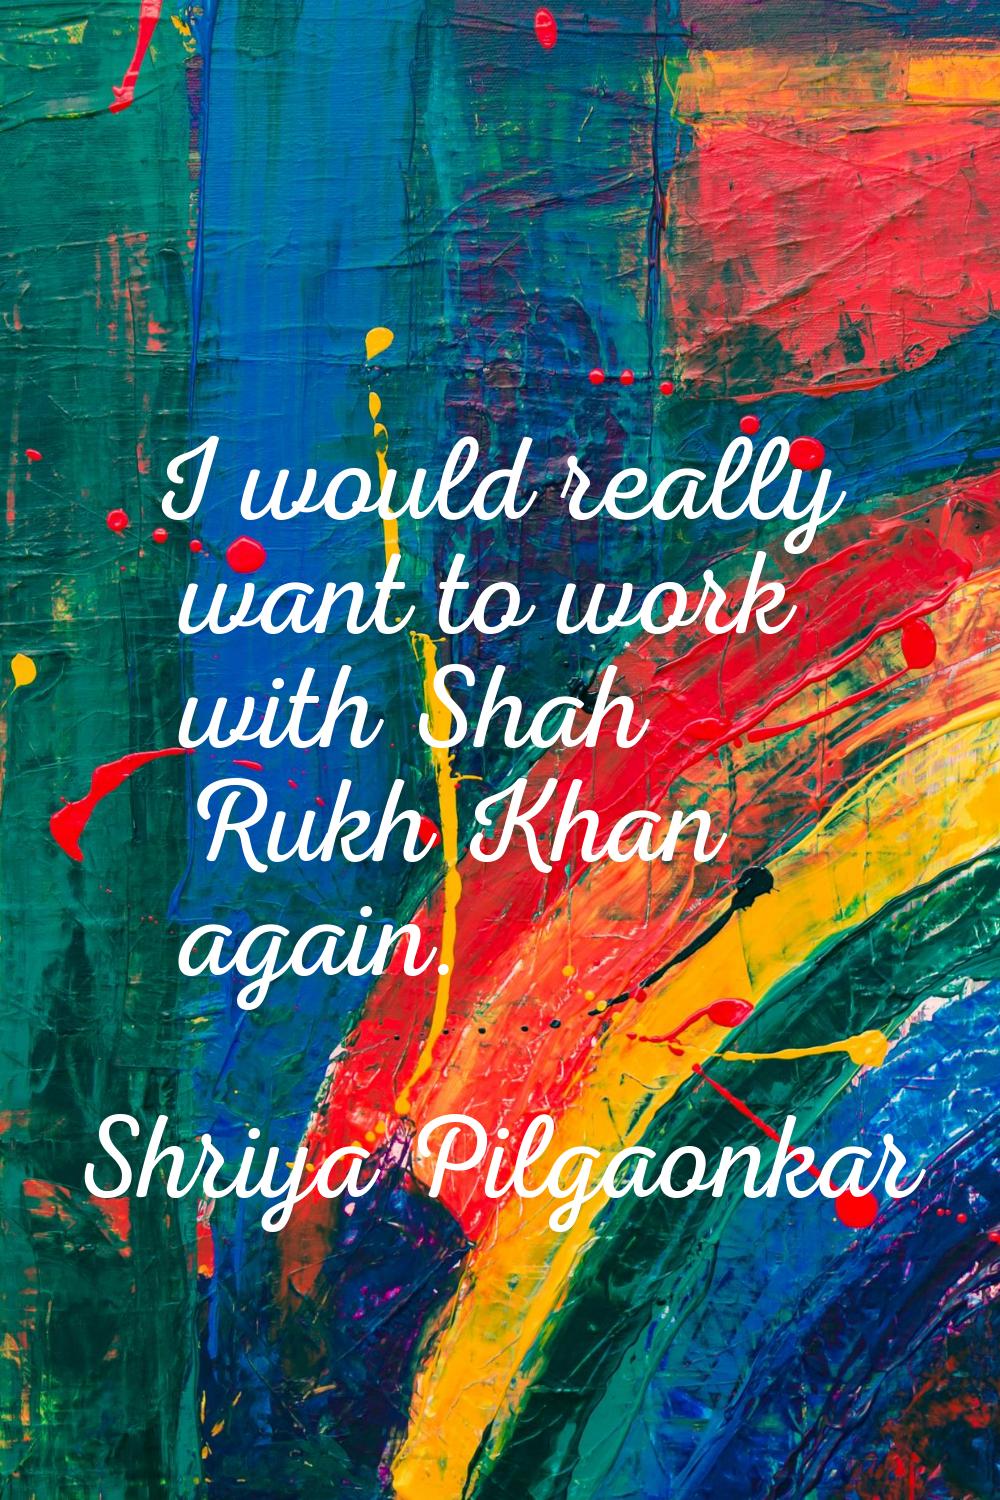 I would really want to work with Shah Rukh Khan again.